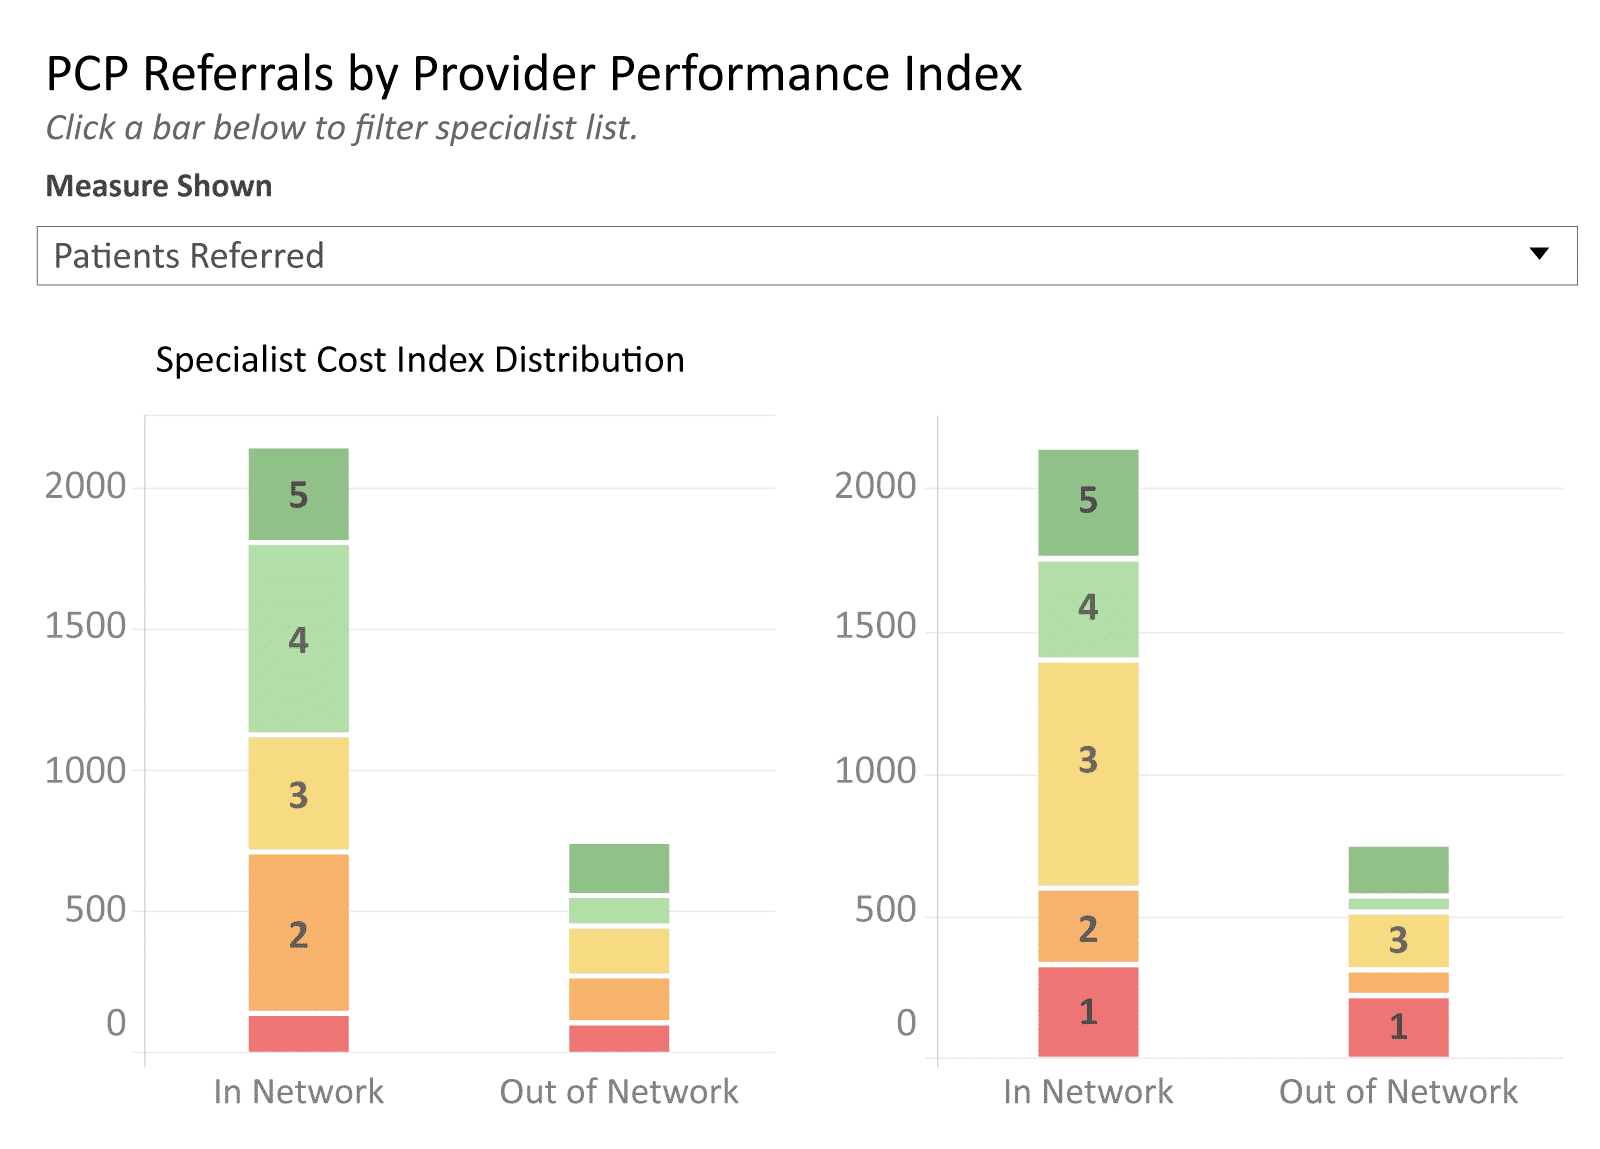 PCP Referrals by Provider Performance Index graph